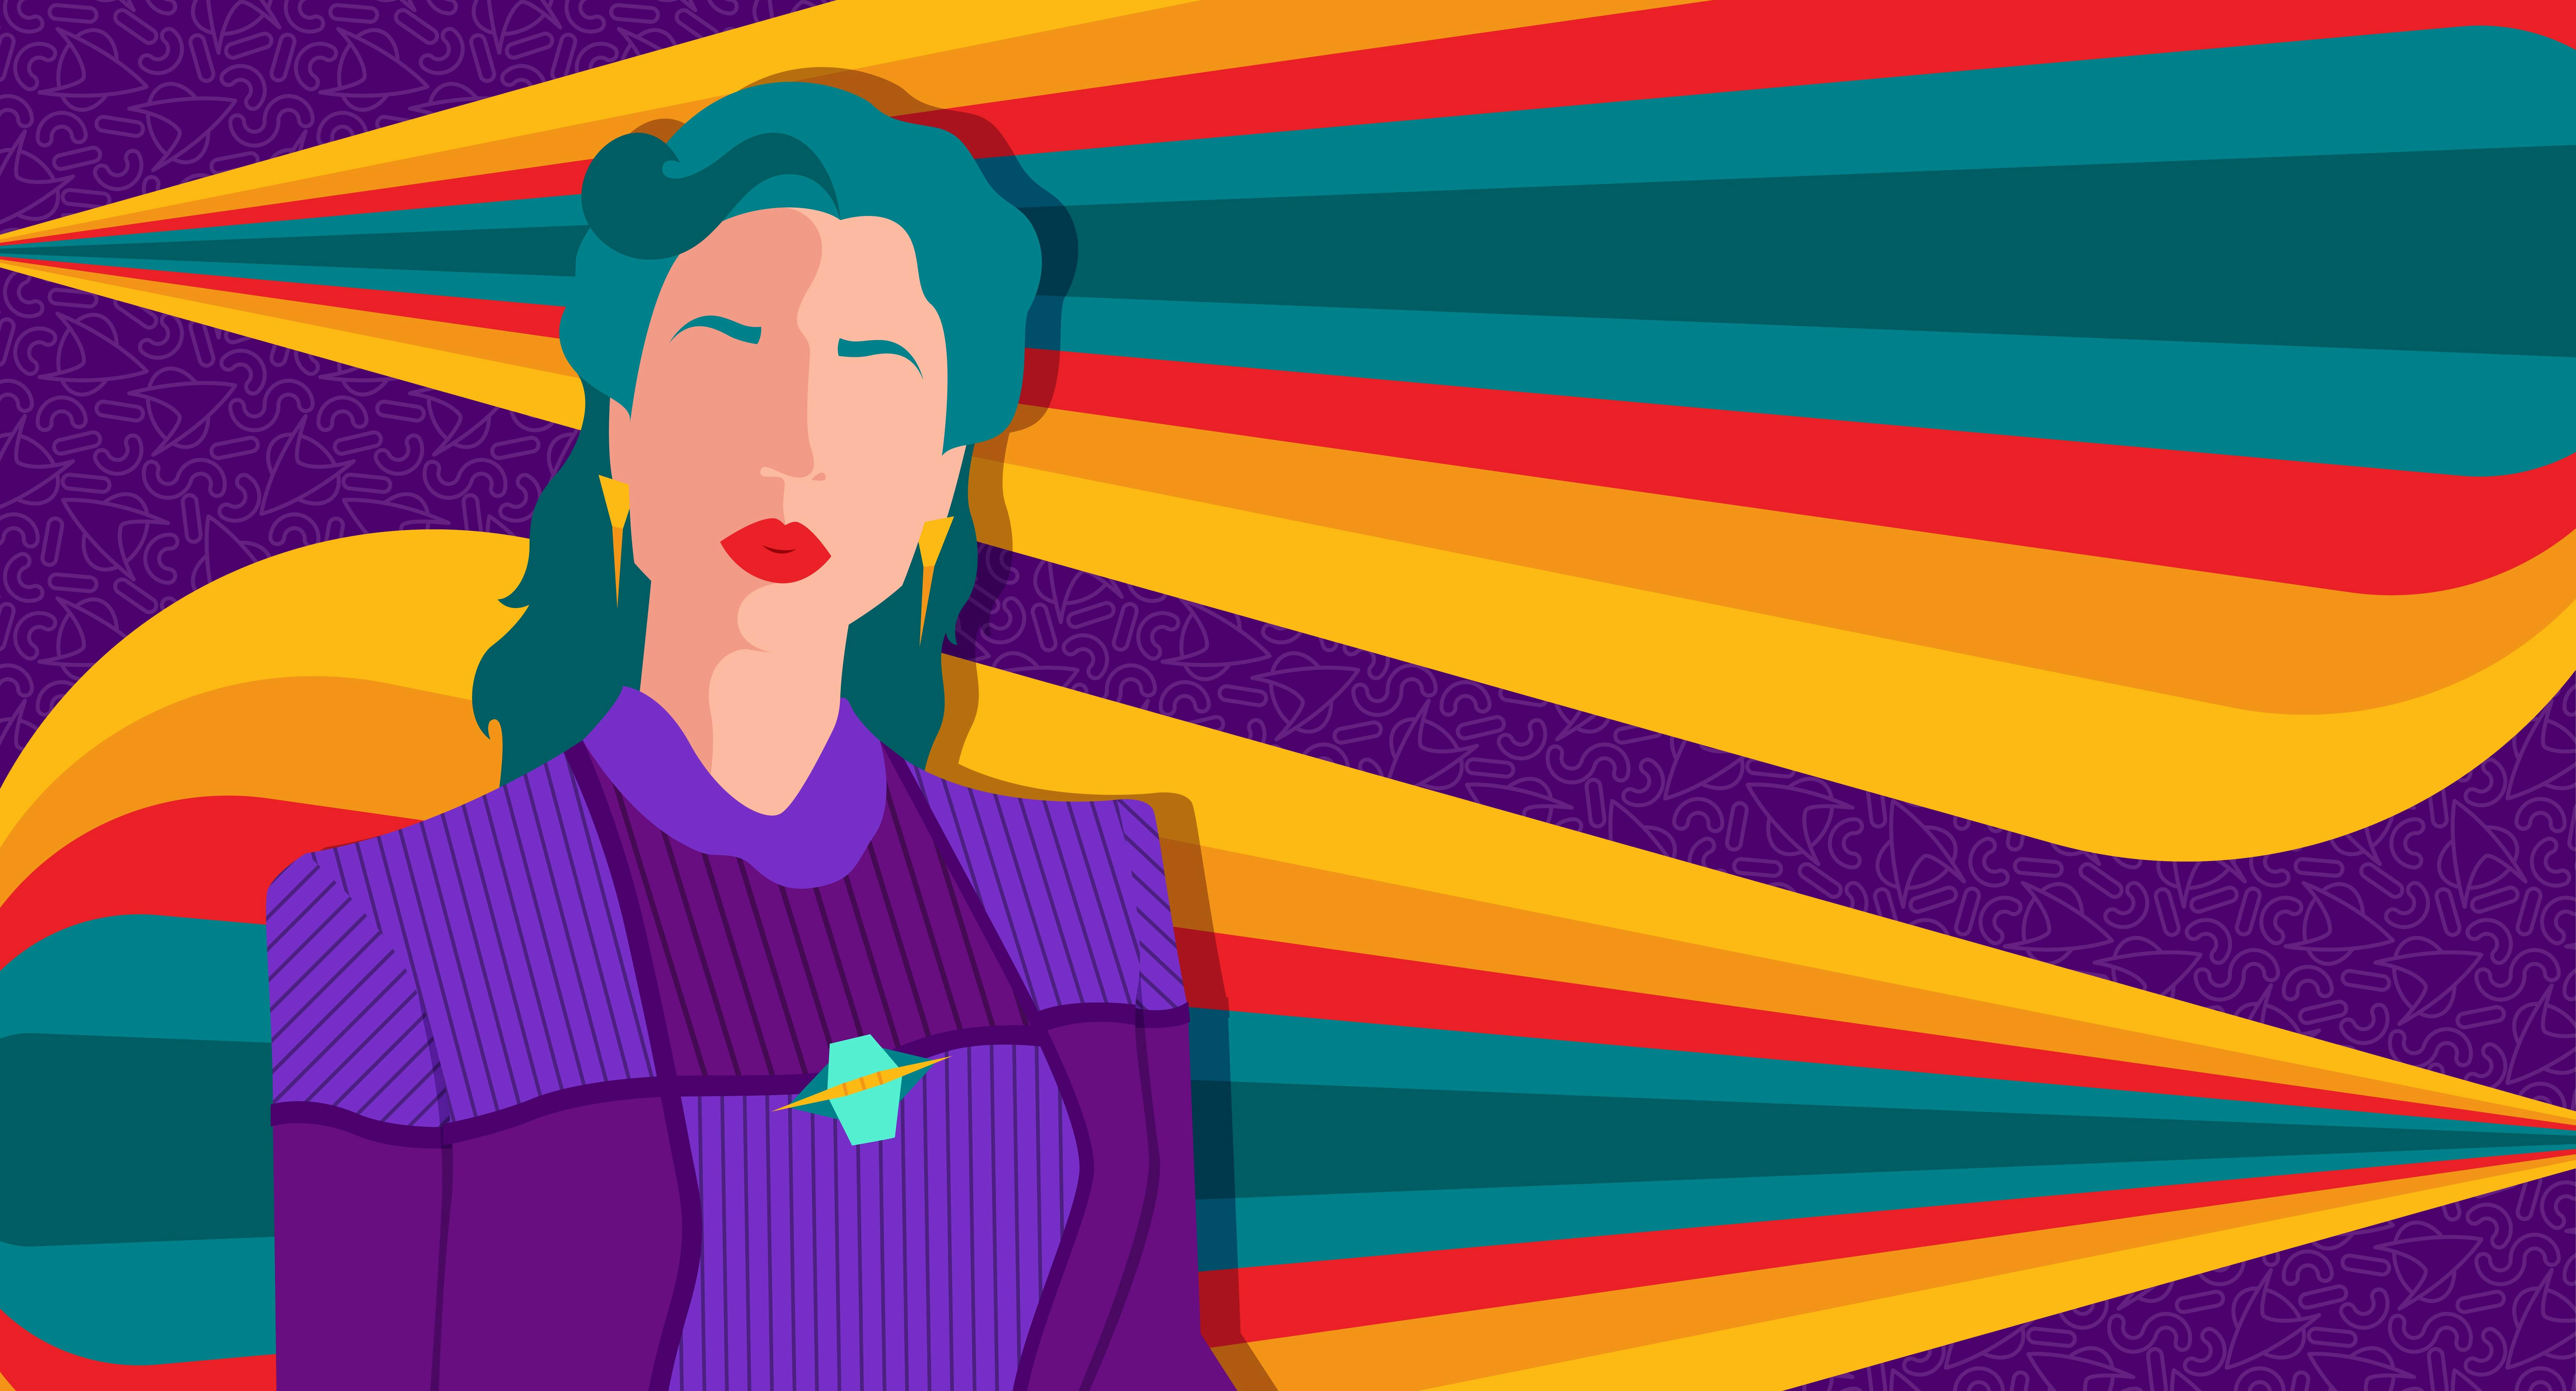 An artistic rendering of Leah Brahms against a purple, orange, red, and teal background.